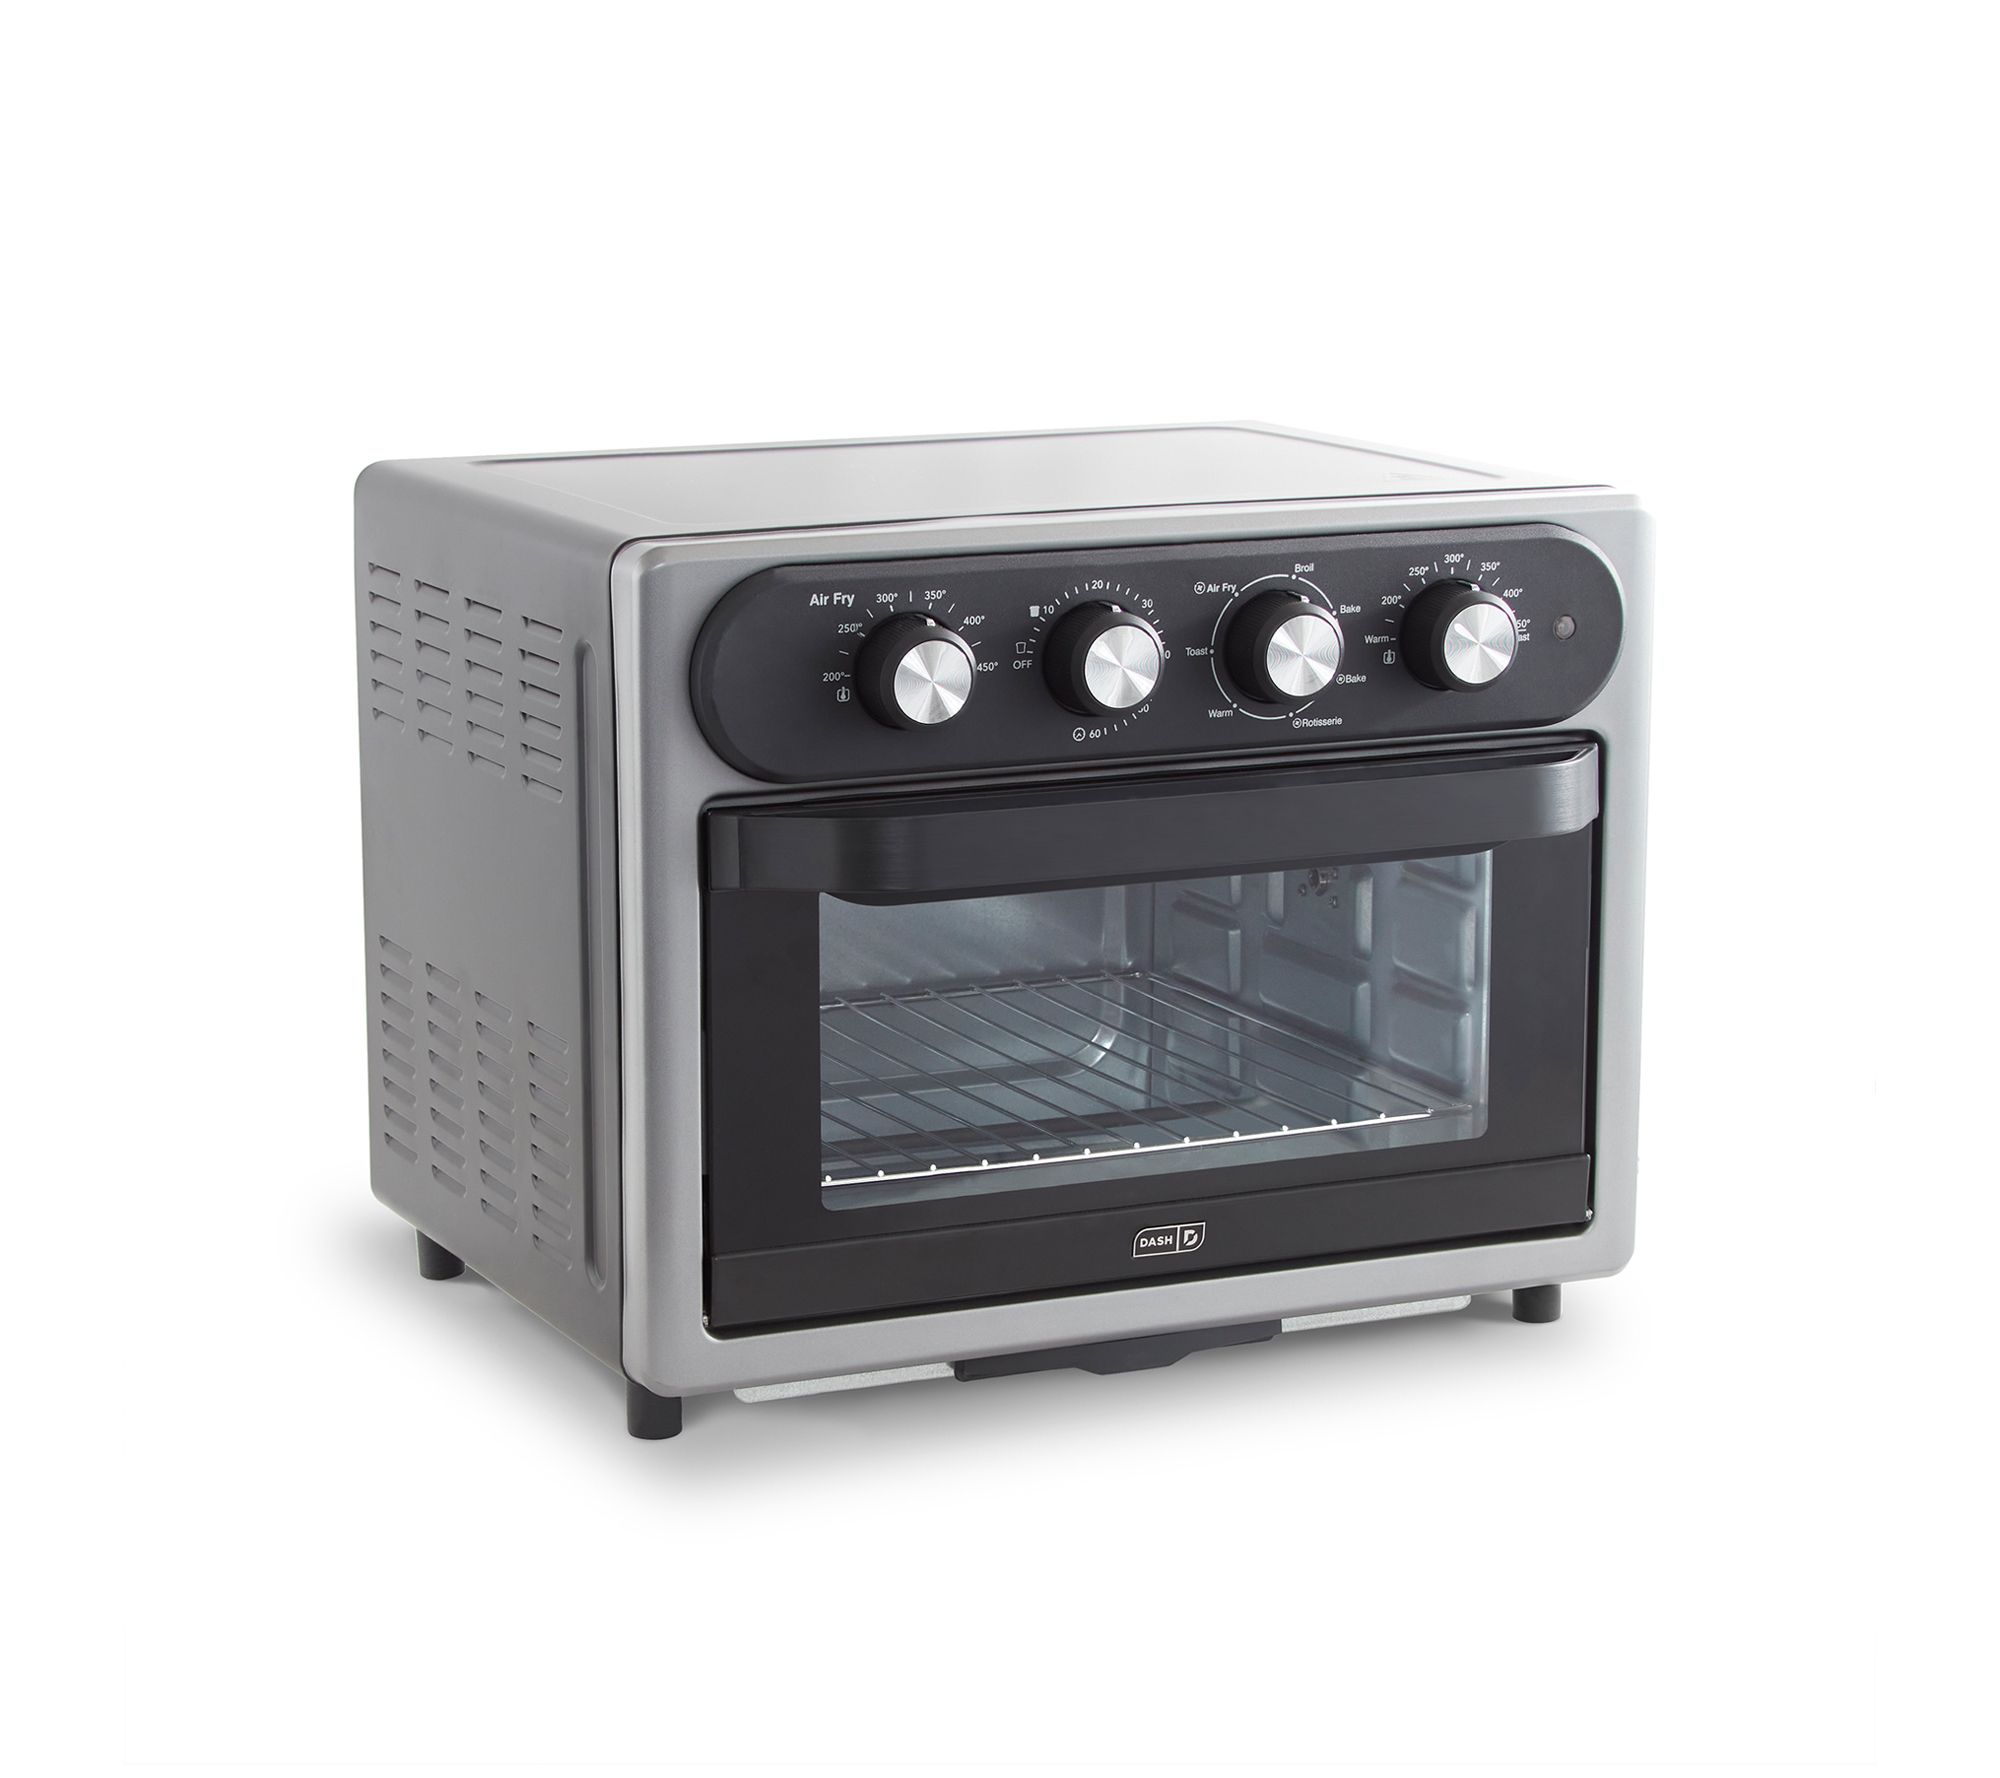 Dash Chef Series 7 in 1 Convection Toaster Oven Cooker 23L Stainless Steel